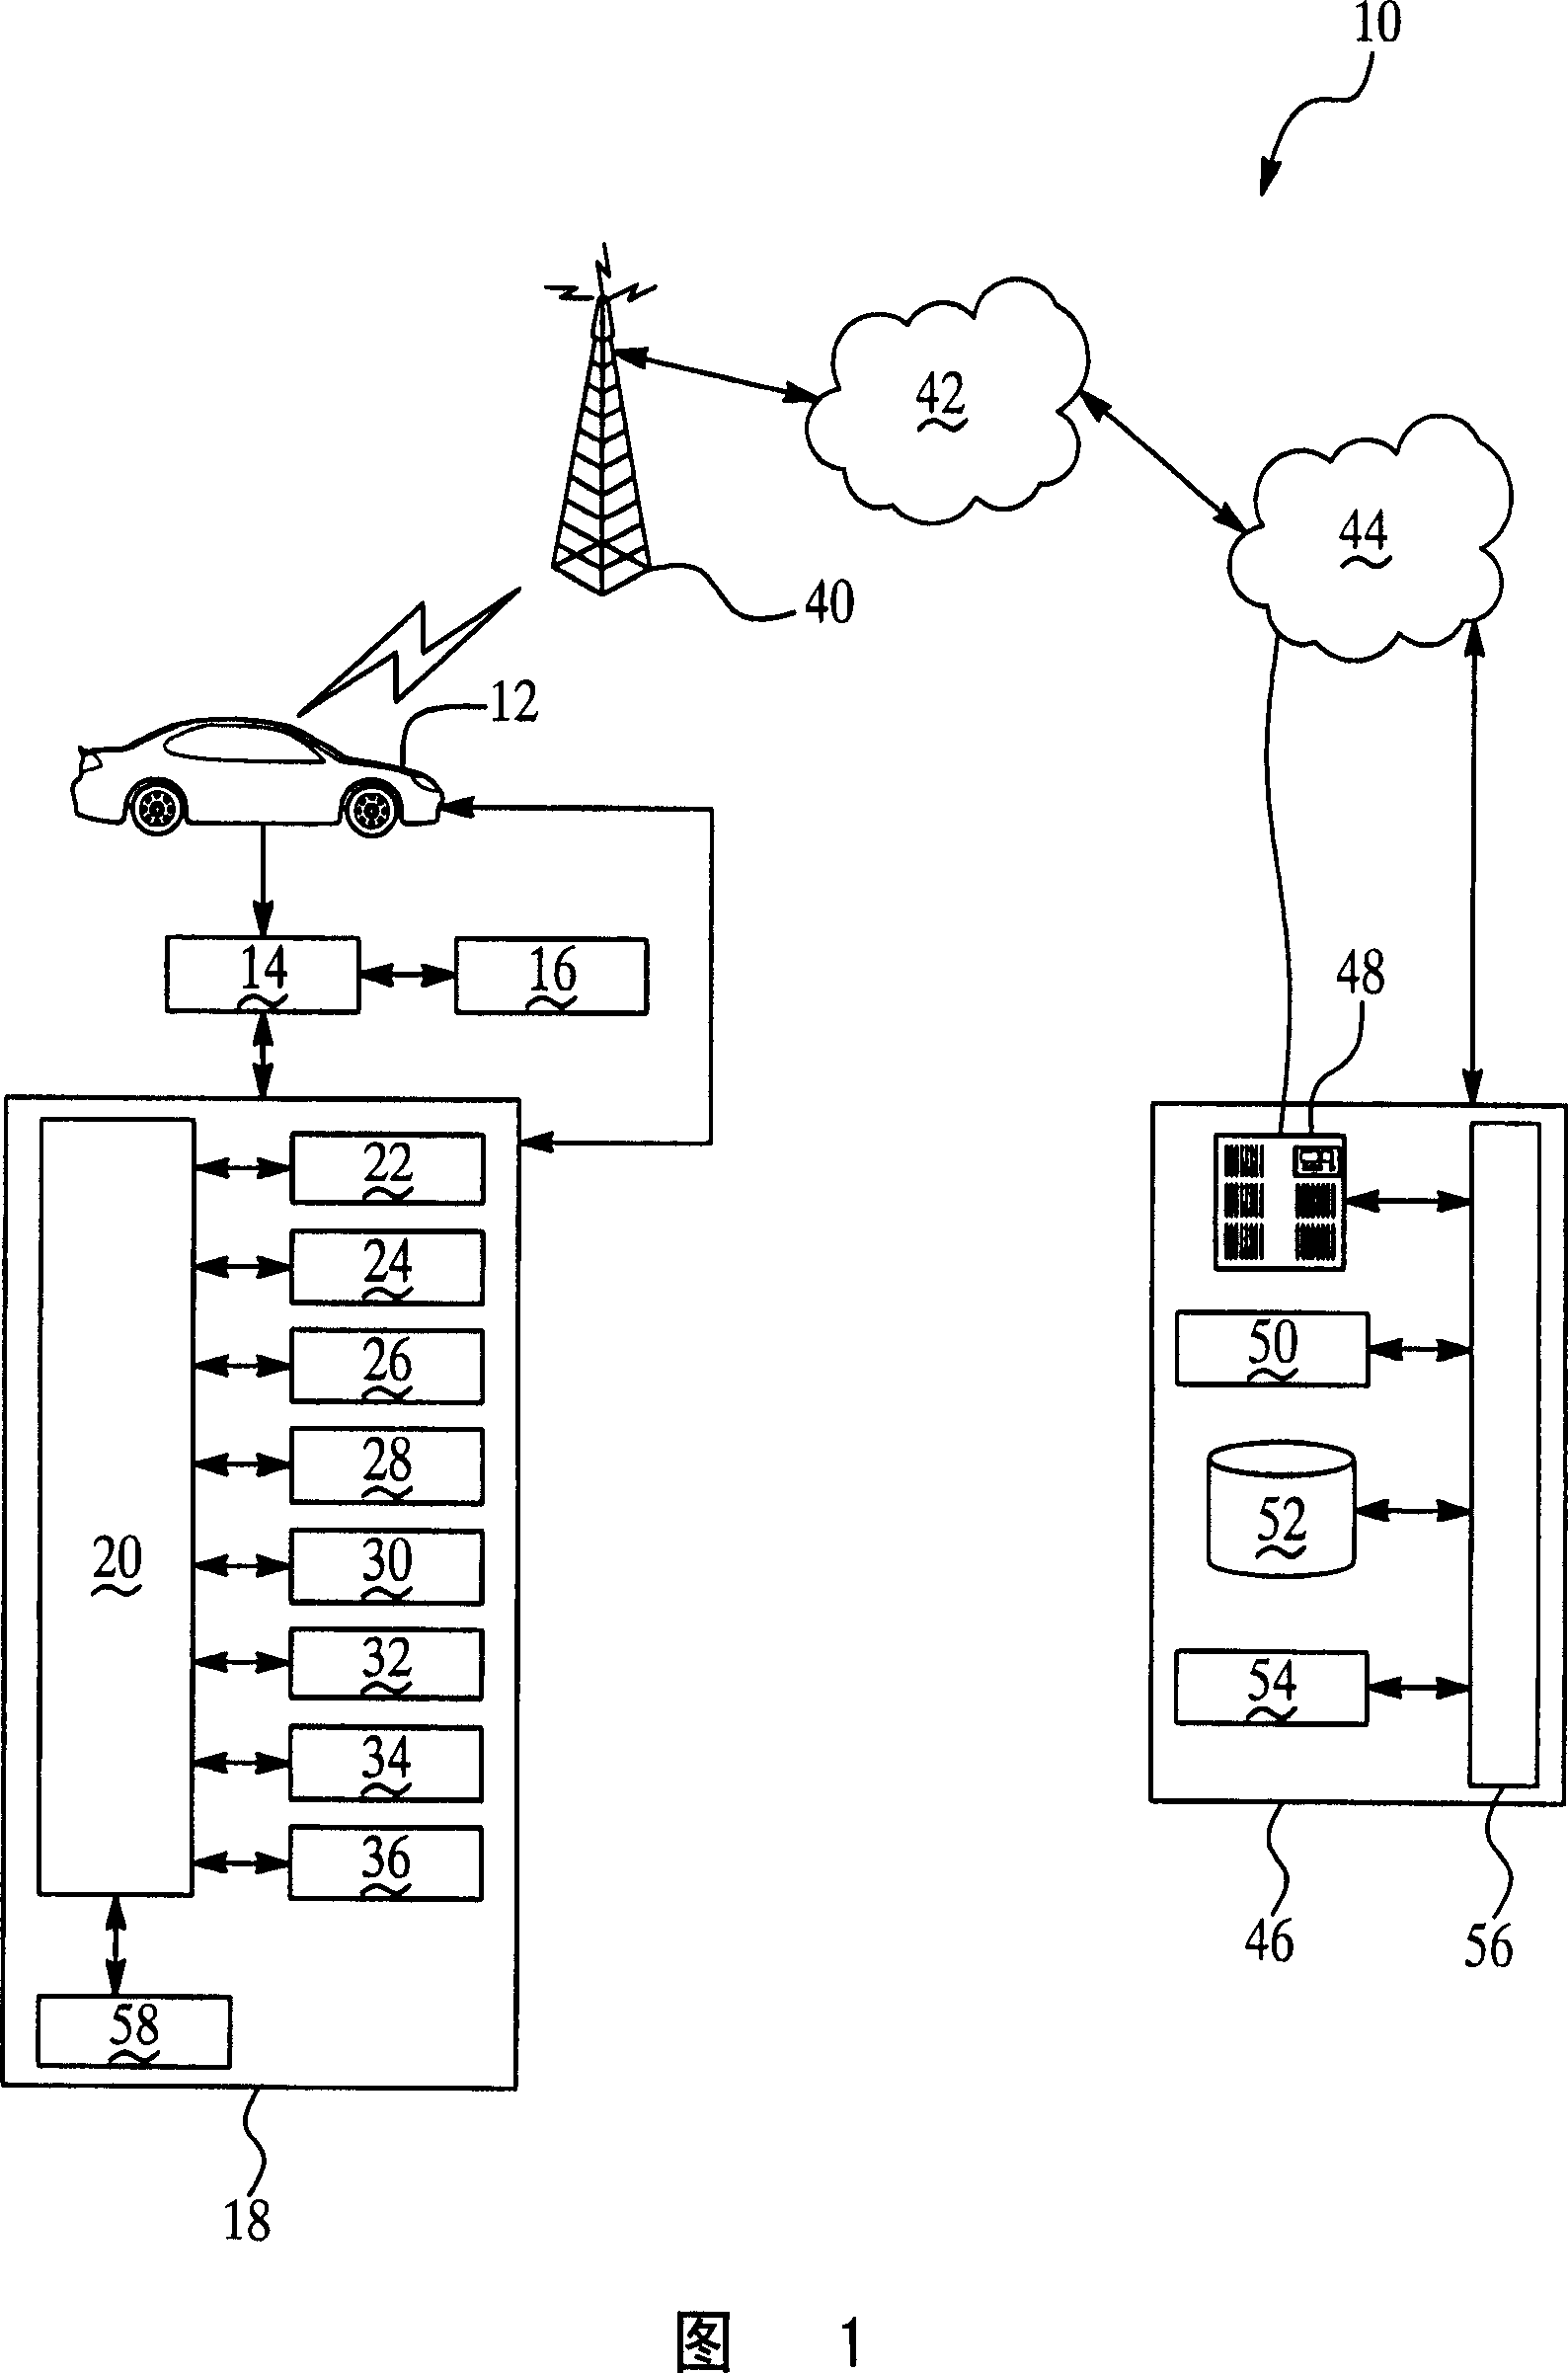 Method for alerting a vehicle user to refuel prior to exceeding a remaining driving distance